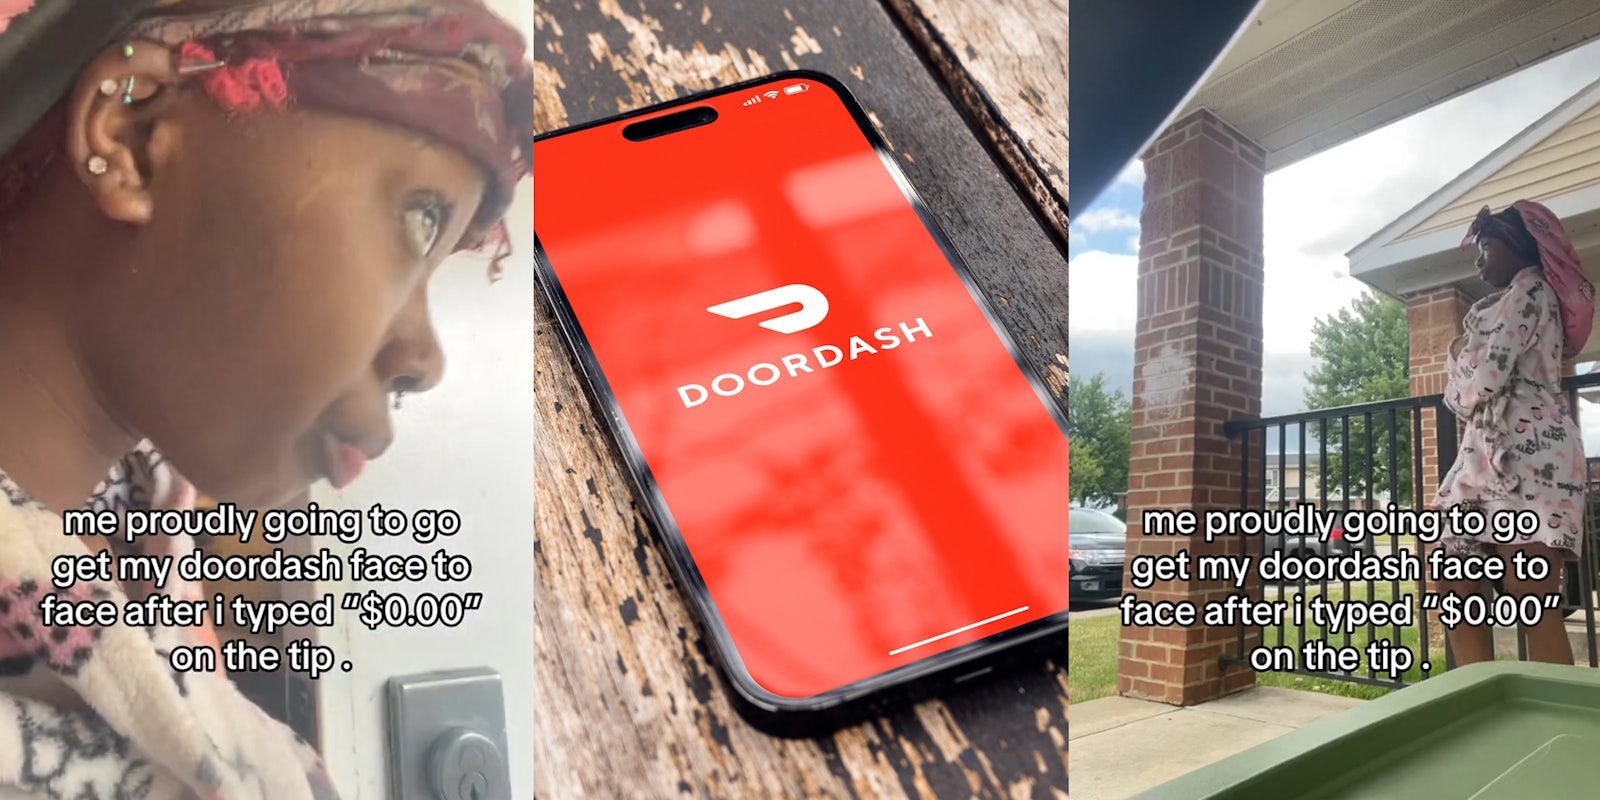 DoorDash customer opening door with caption 'me proudly going to go get my doordash face to face after i typed '$0.00' on the tip.' (l) DoorDash on phone on wooden surface (c) DoorDash customer standing outside with caption 'me proudly going to go get my doordash face to face after i typed '$0.00' on the tip.' (r)